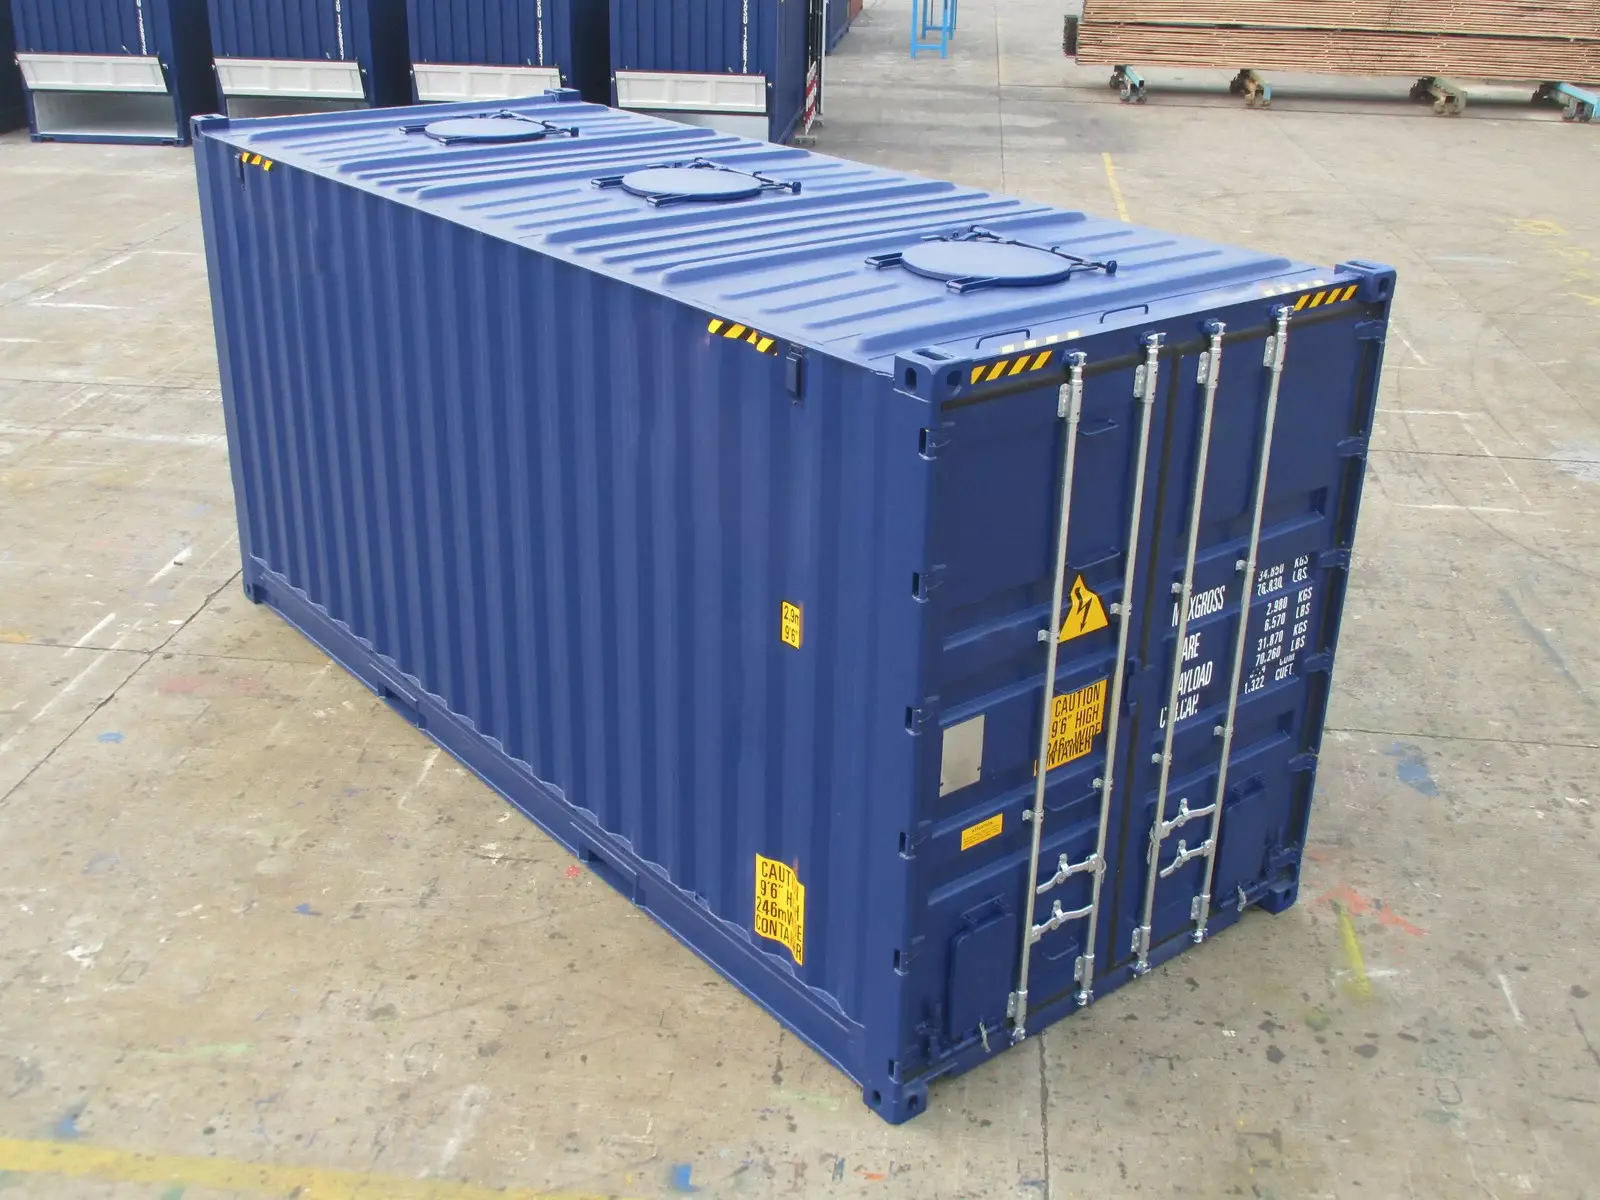 Shipping containers for sale in Bremerton